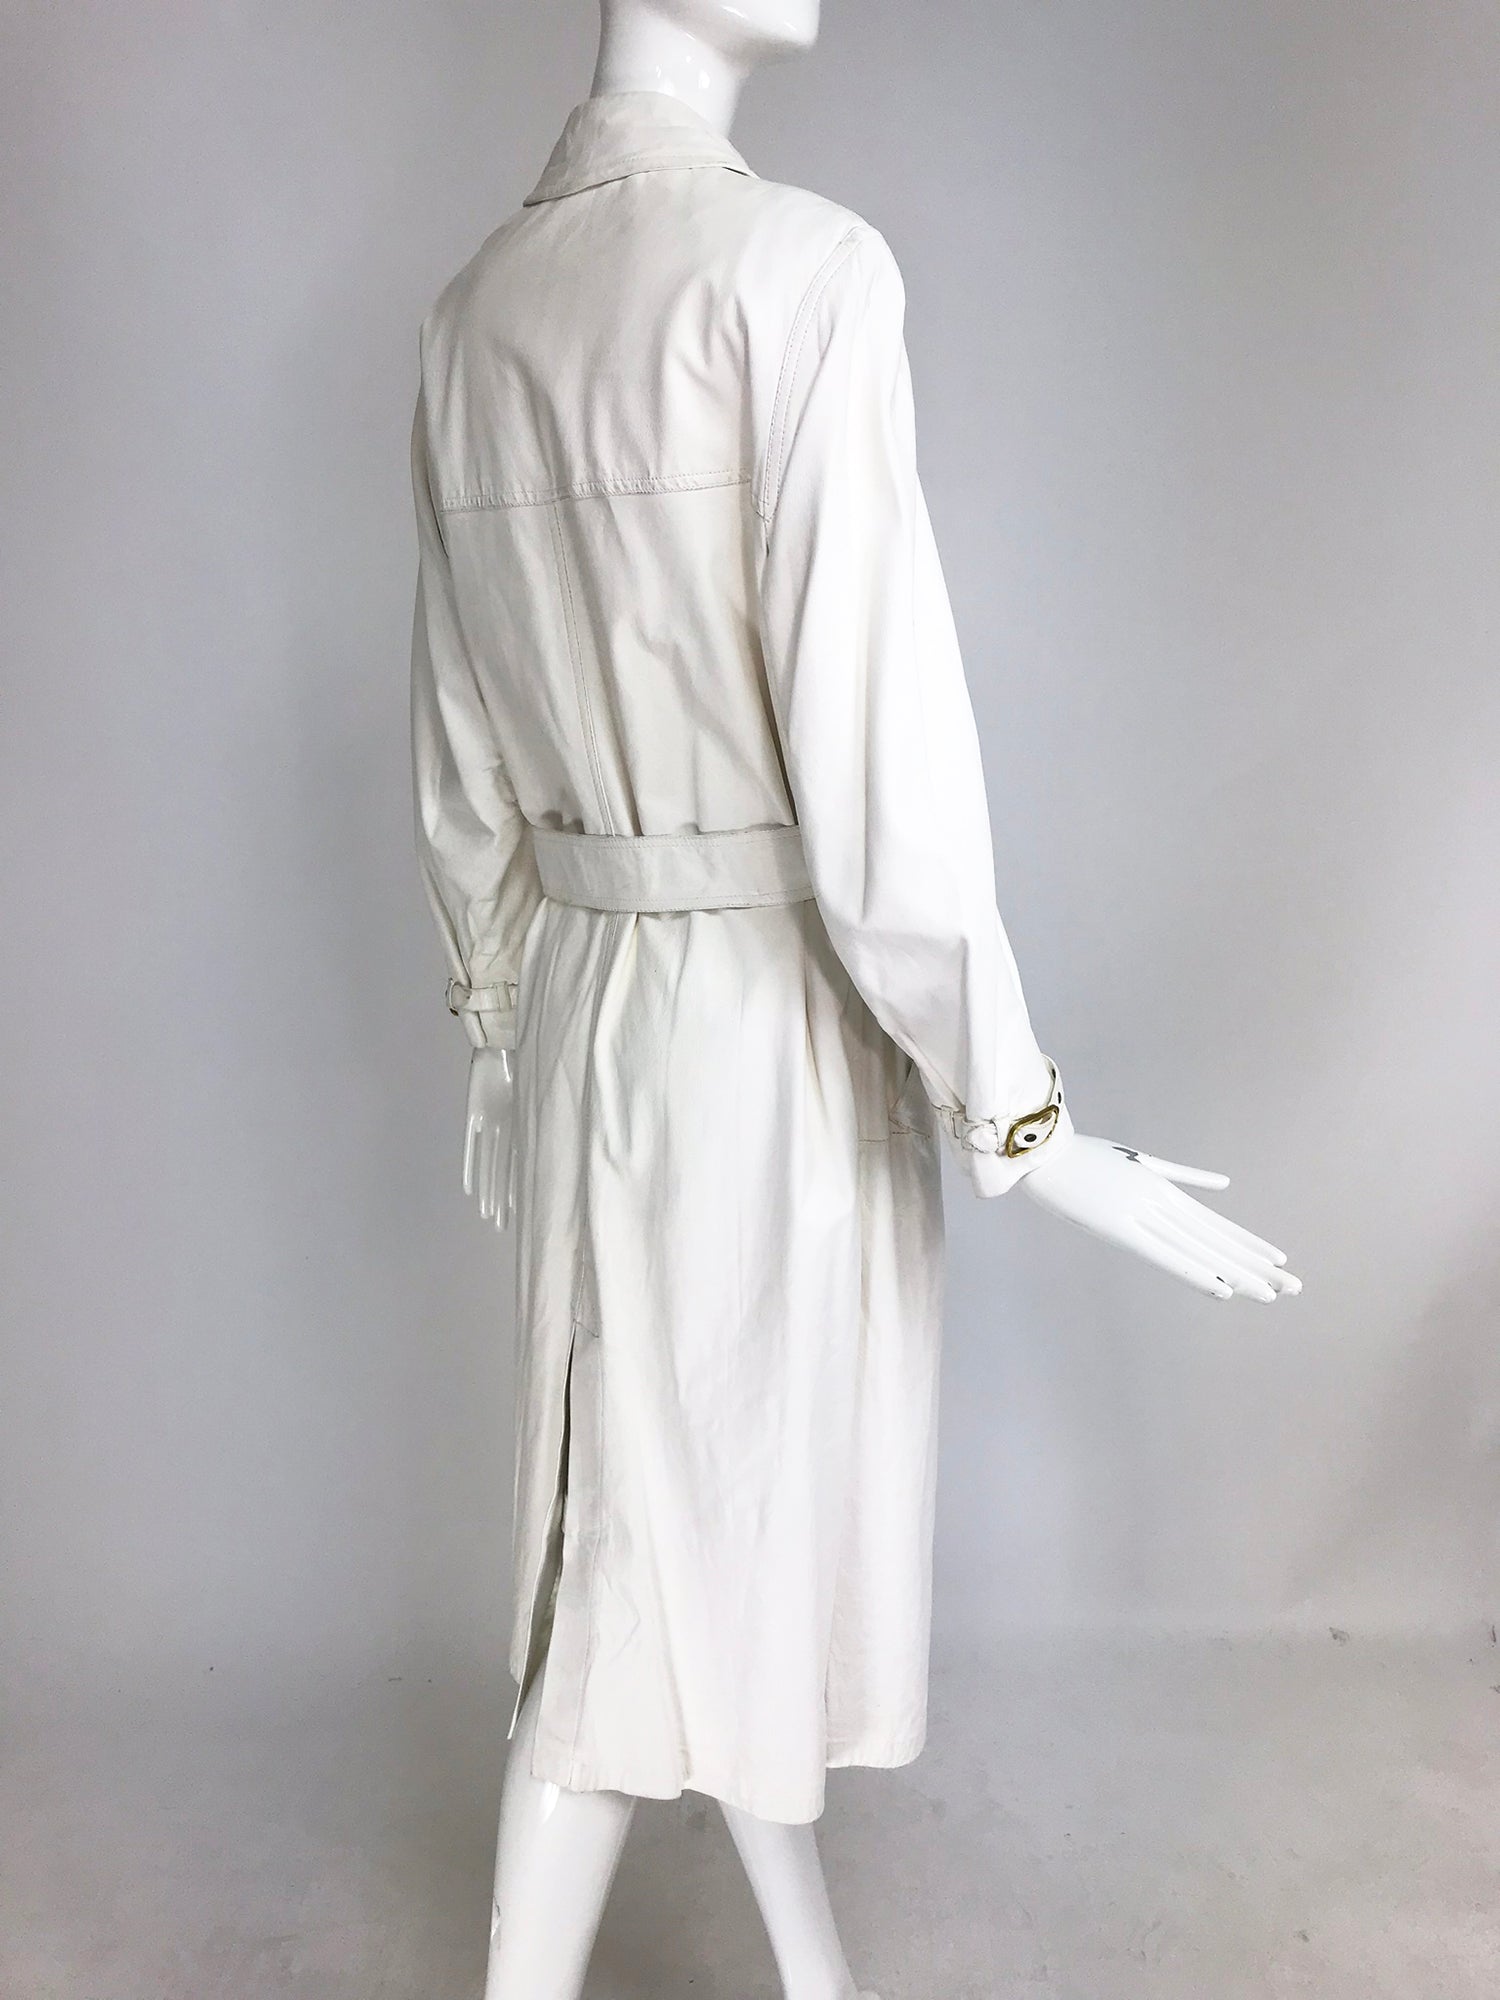 SOLD Samuel Robert White Soft Leather Trench Coat 1960s – Palm